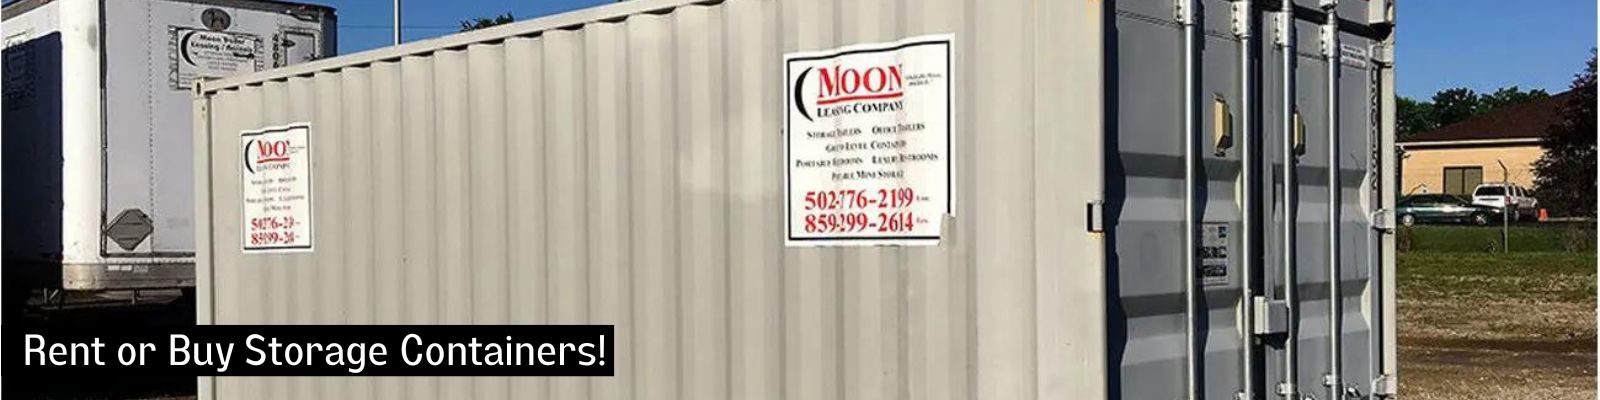 Moon Trailer Leasing Rent or Buy Storage Containers.